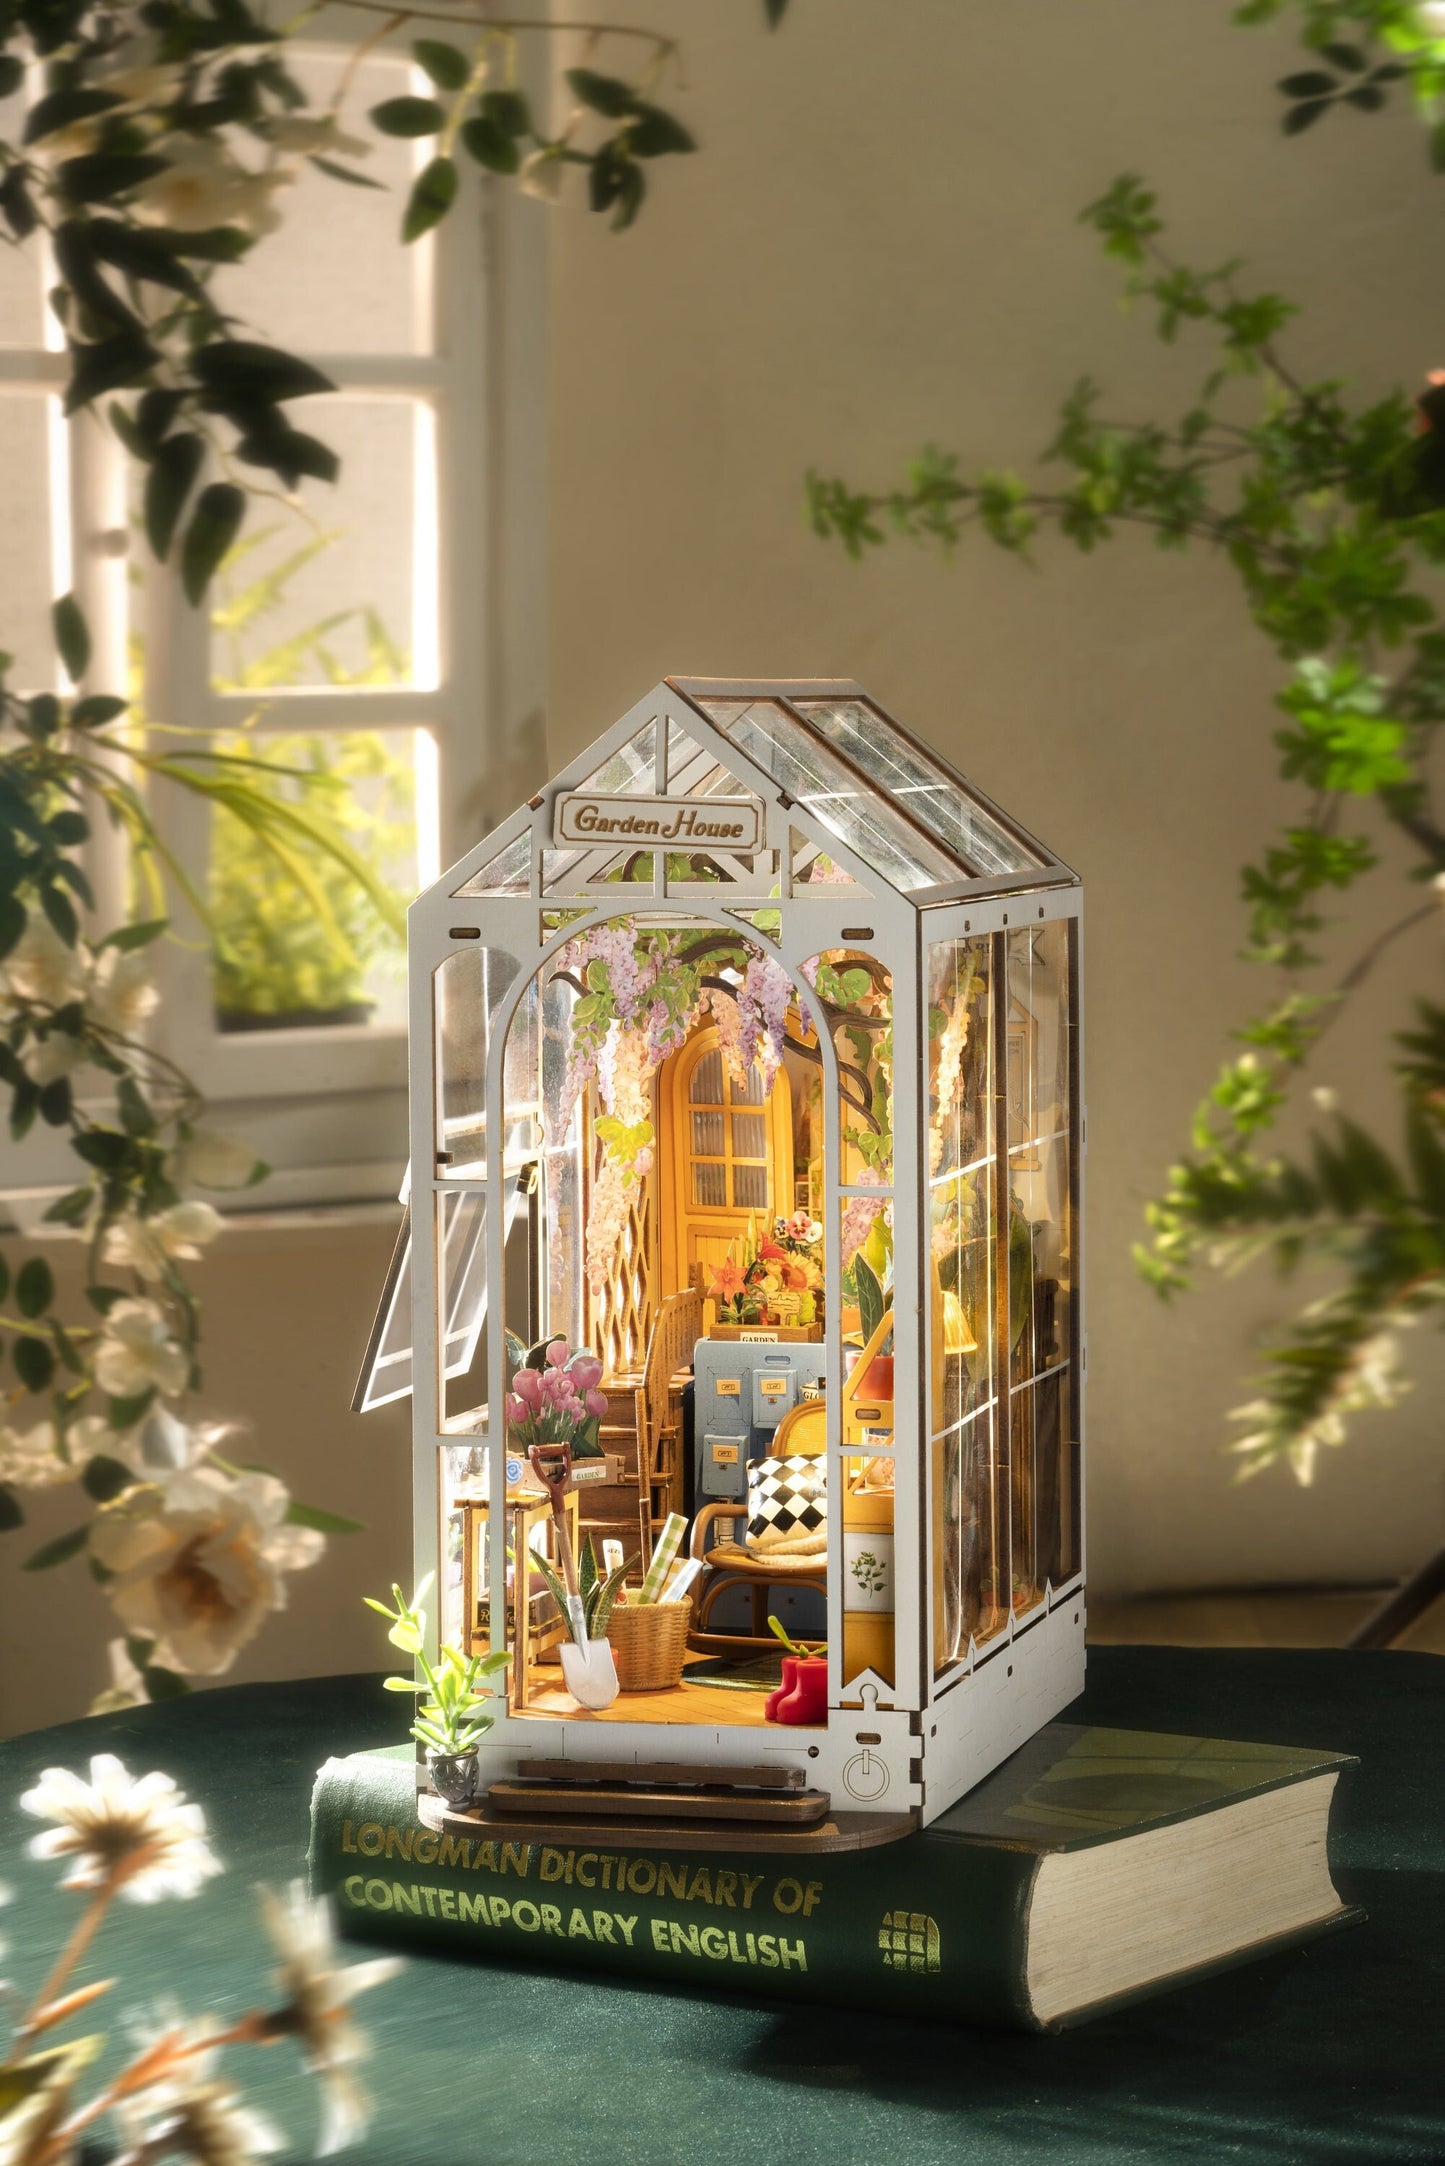 Build Your Own Garden Greenhouse, Doll House DIY Kit, Model Set, Miniature Greenhouse Craft Kit for Adults, Mini Diorama Room with Furniture